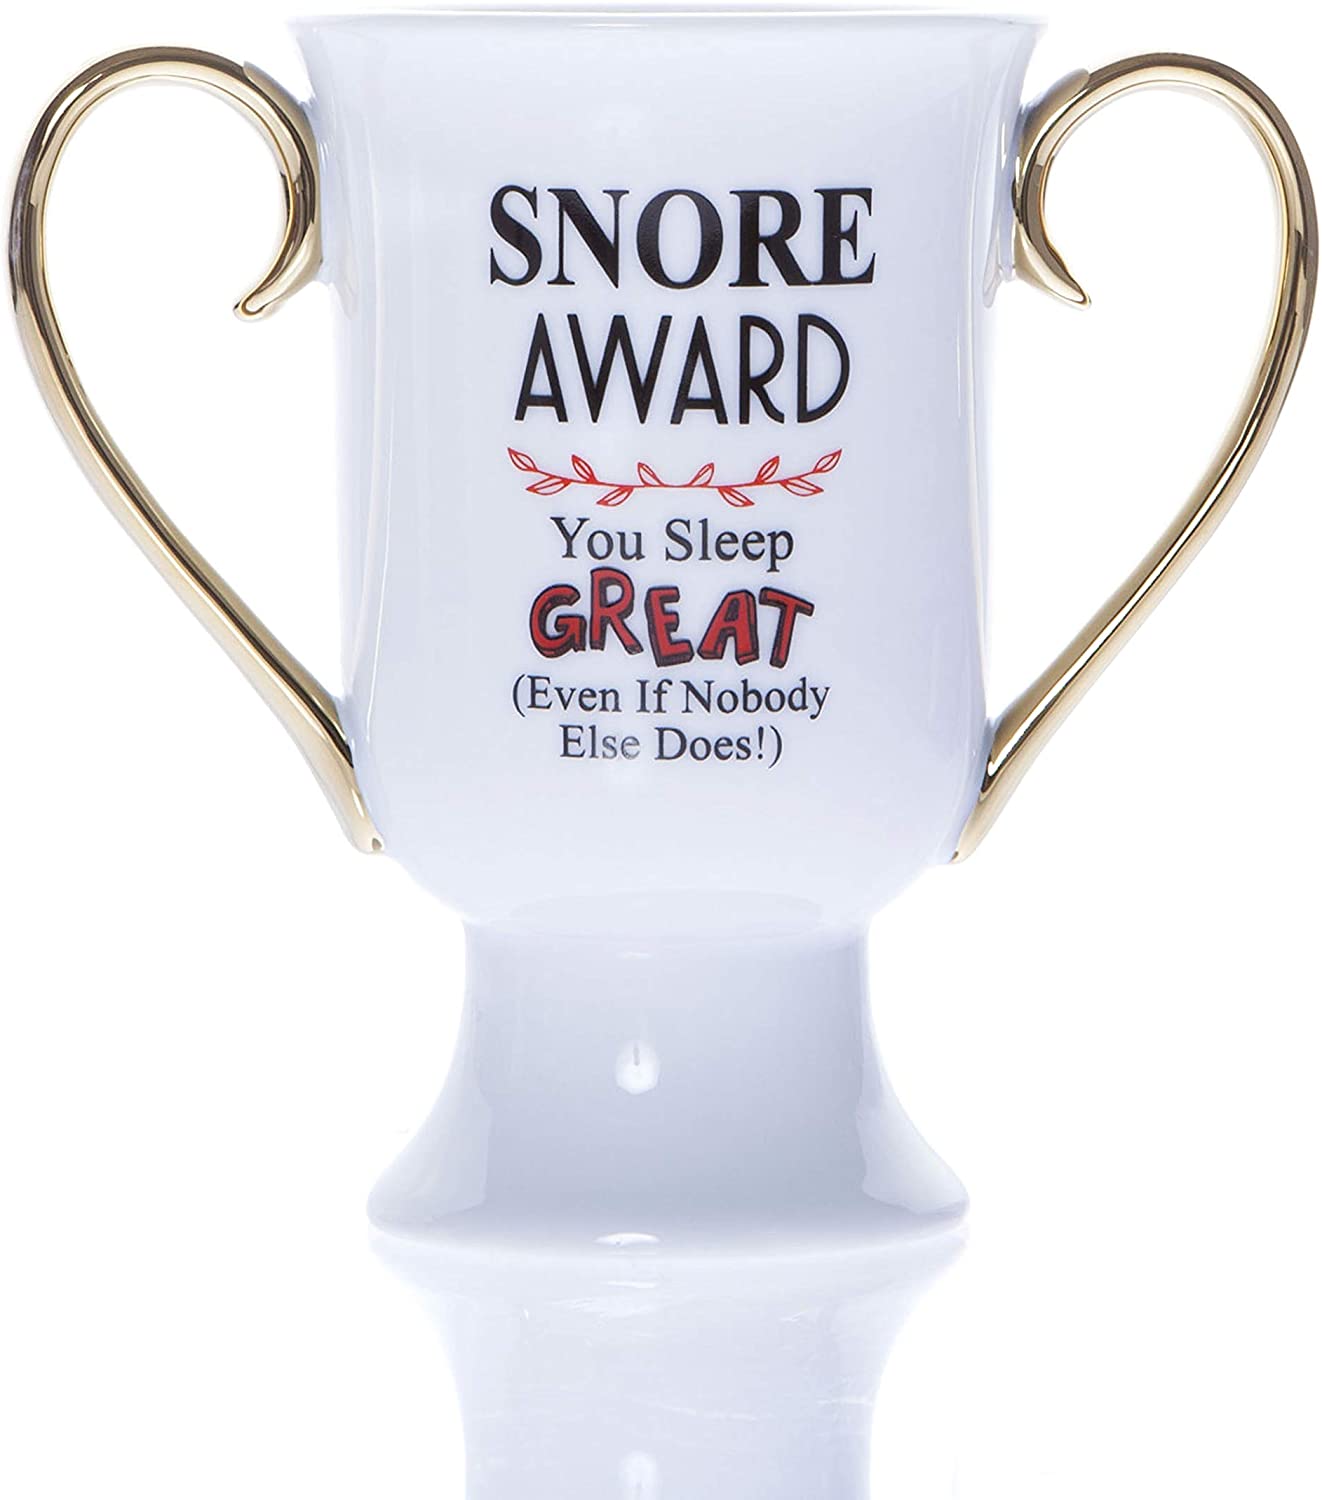 nore Award Gift for Him Secret Gifts For A Married Man